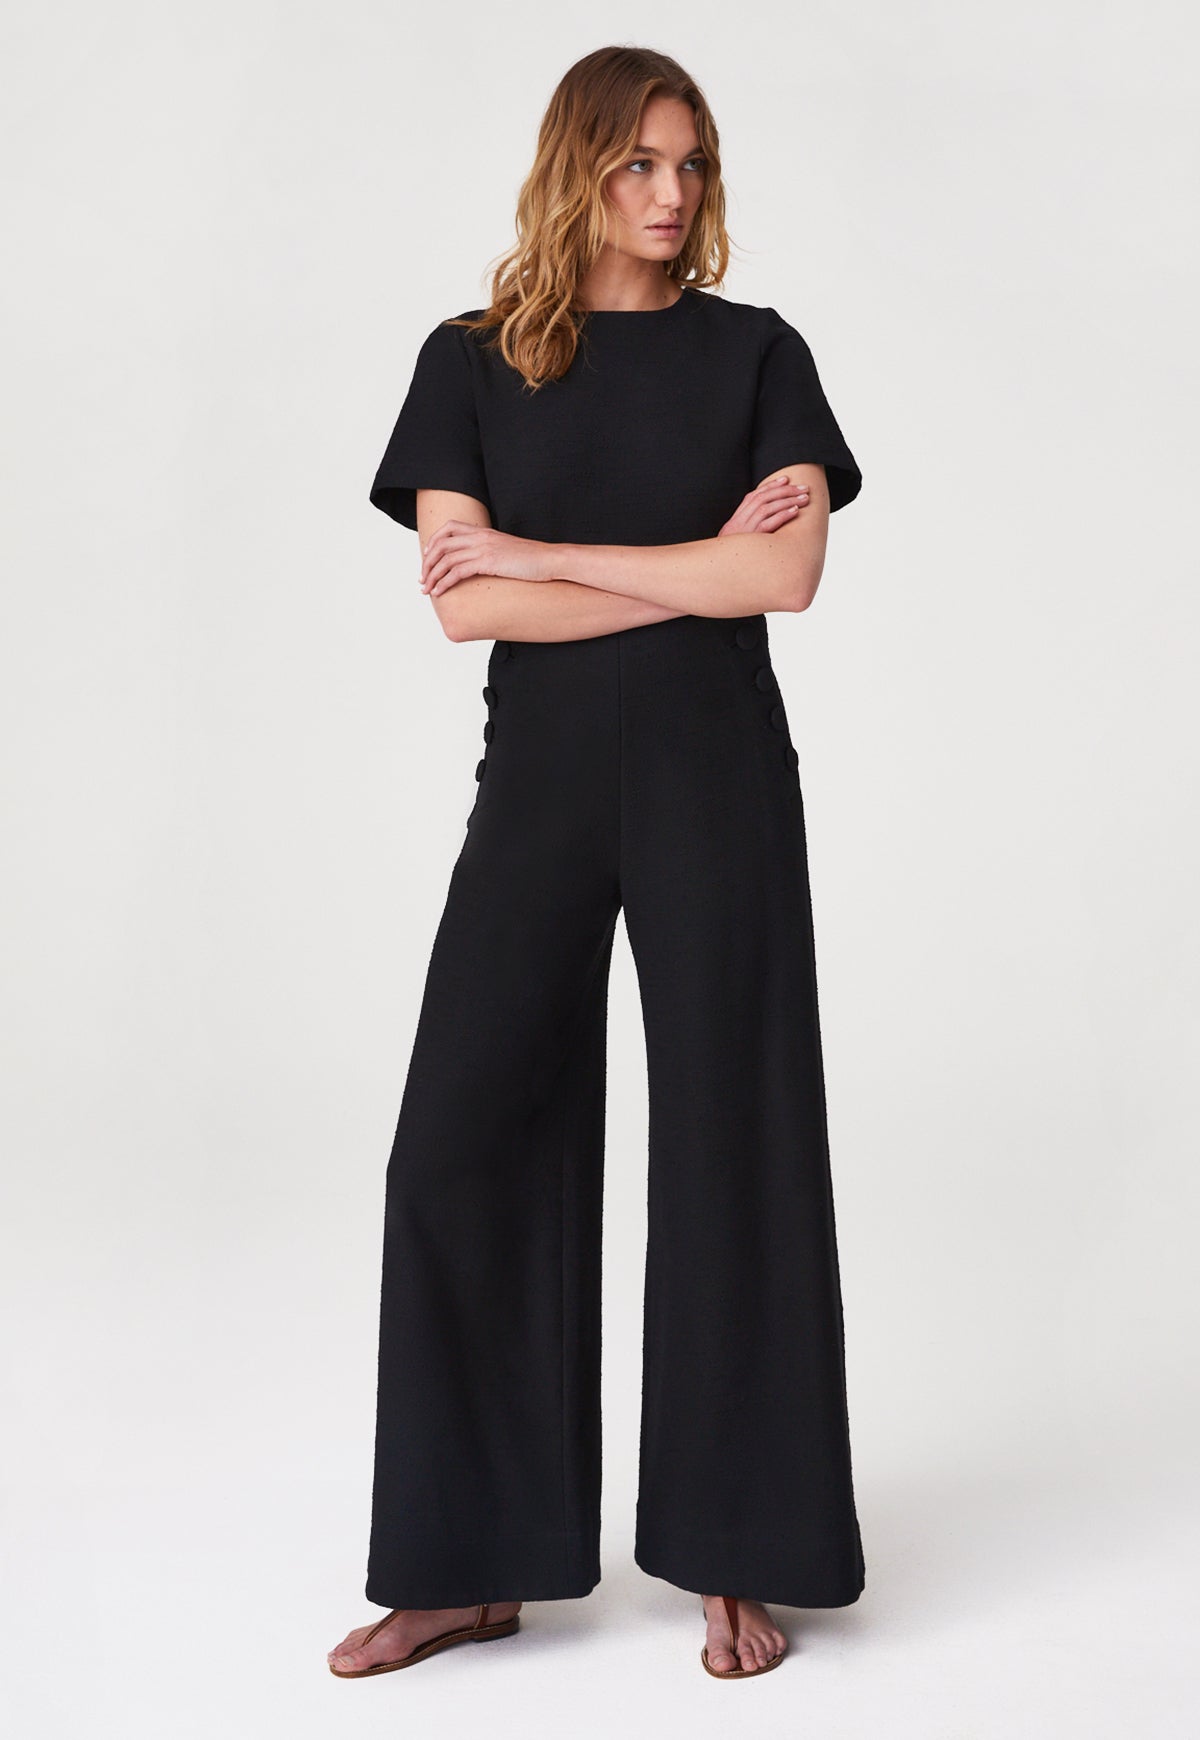 THE SAILOR PANT in BLACK TEXTURED COTTON